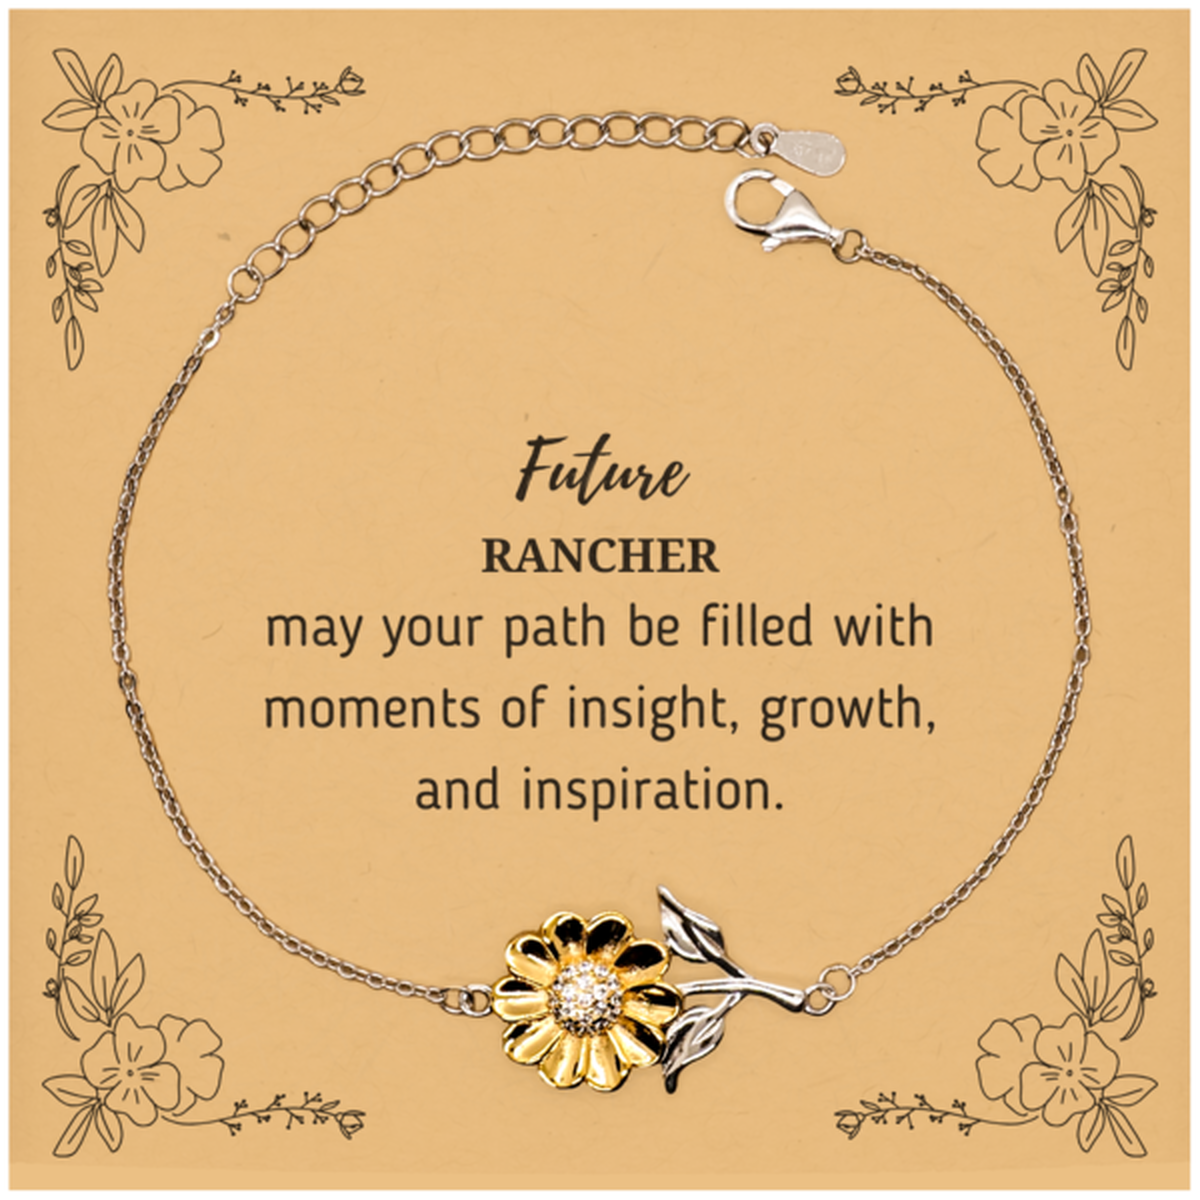 Future Rancher Gifts, May your path be filled with moments of insight, Graduation Gifts for New Rancher, Christmas Unique Sunflower Bracelet For Men, Women, Friends